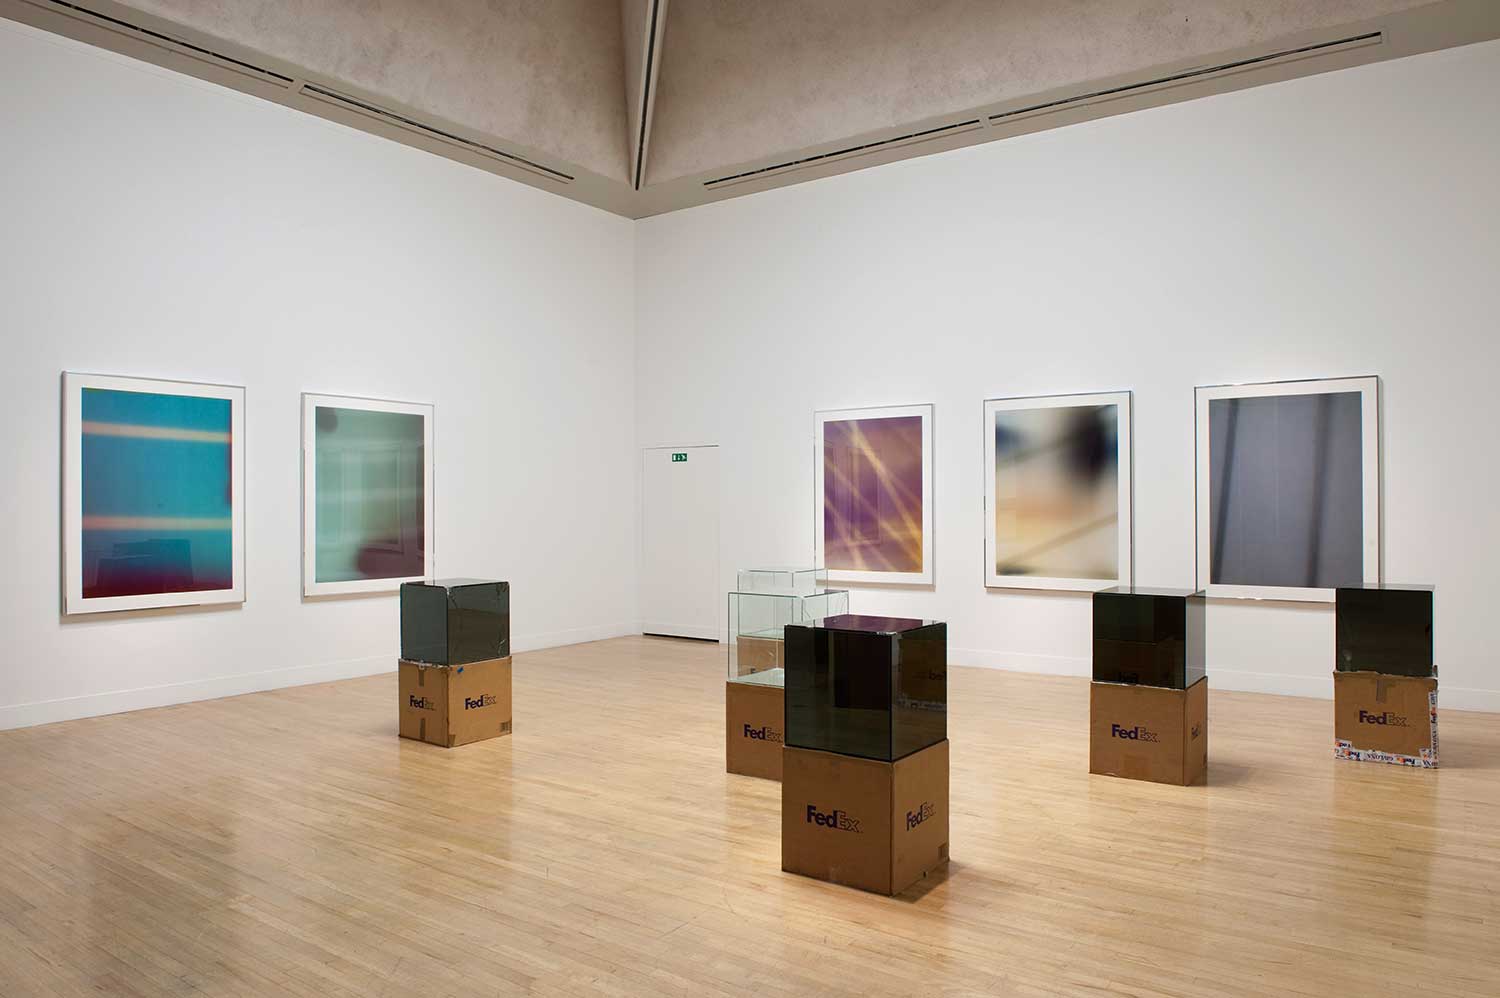 Installation view of Altermodern: 2009 Tate Triennial Exhibition, 2009, Tate Britain, London. Photo: Sam Drake, Tate Photography, courtesy of the artist; Regen Projects, Los Angeles; and Thomas Dane Gallery, London